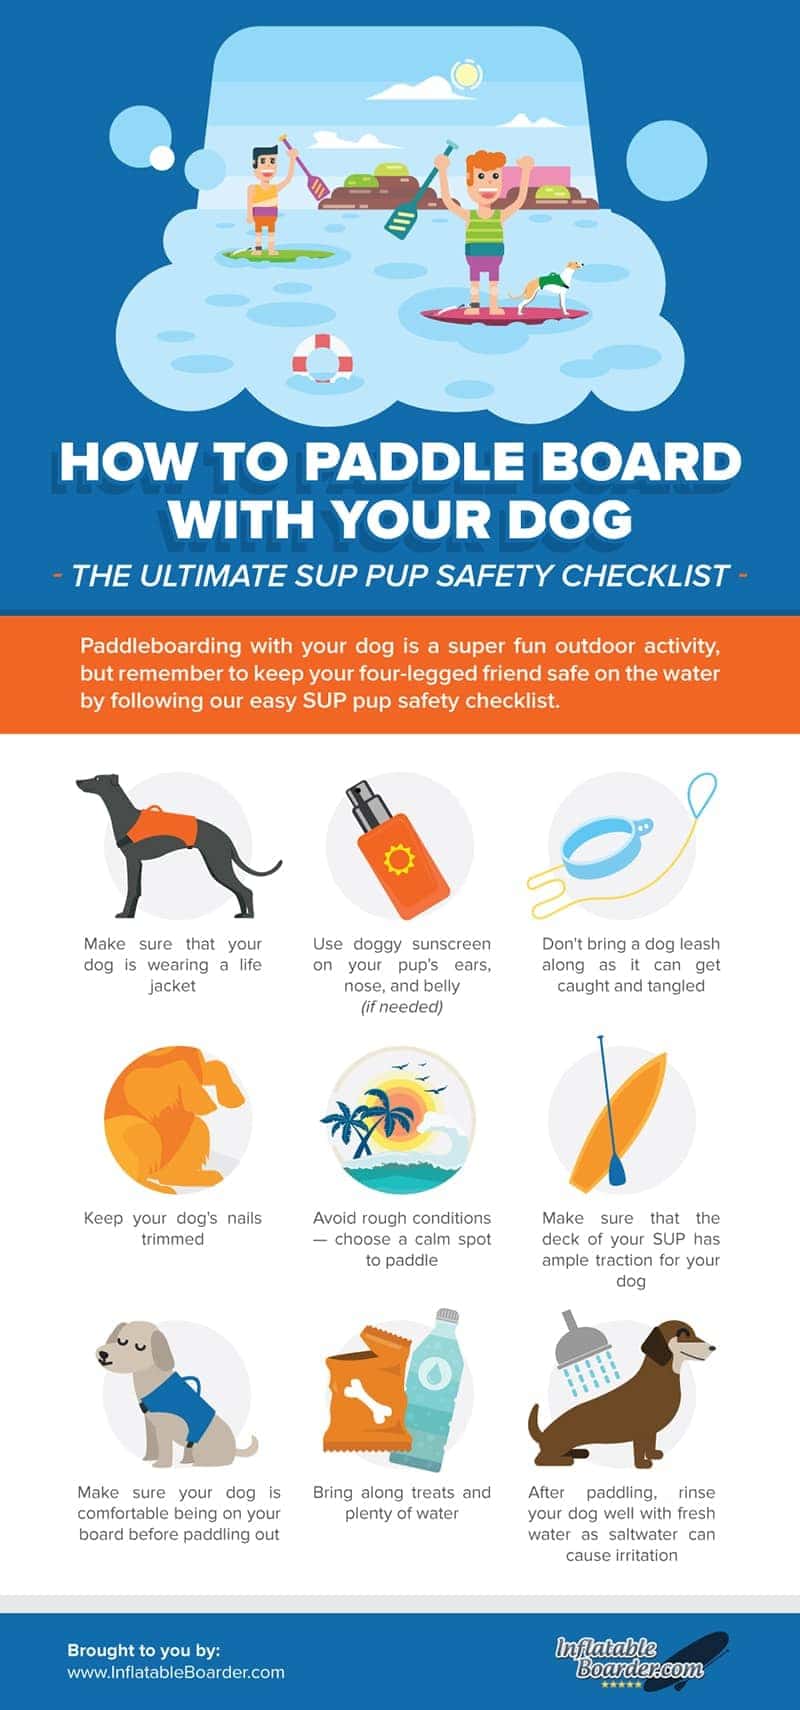 How to Paddle Board with Your Dog: The Ultimate SUP Pup Safety Checklist